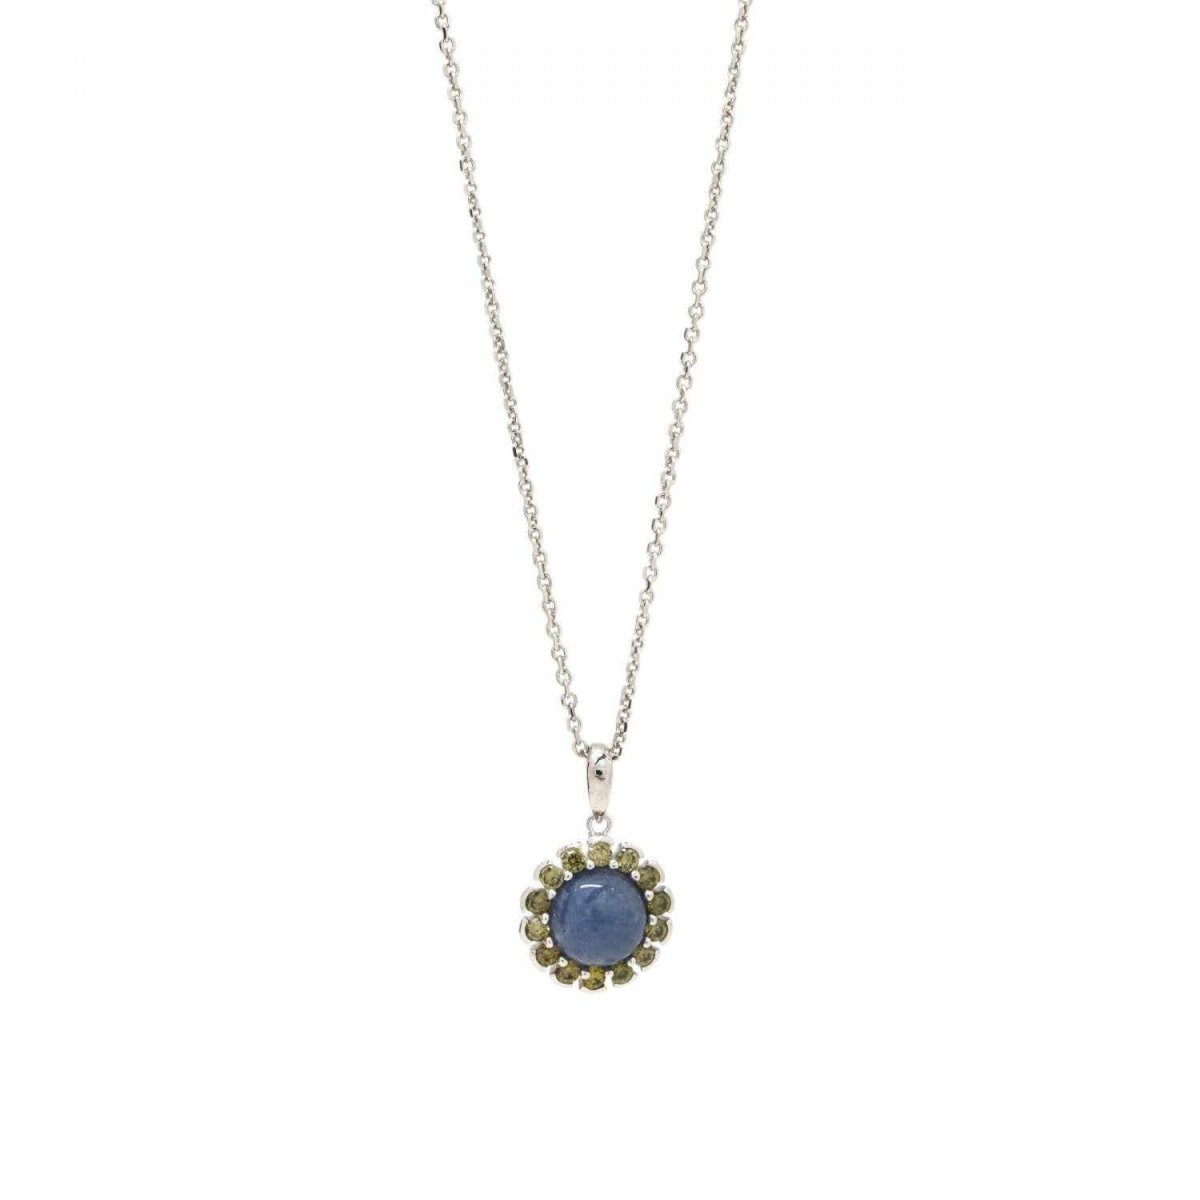 Necklace - Necklaces with stones in silver with floral design in blue sapphire tone